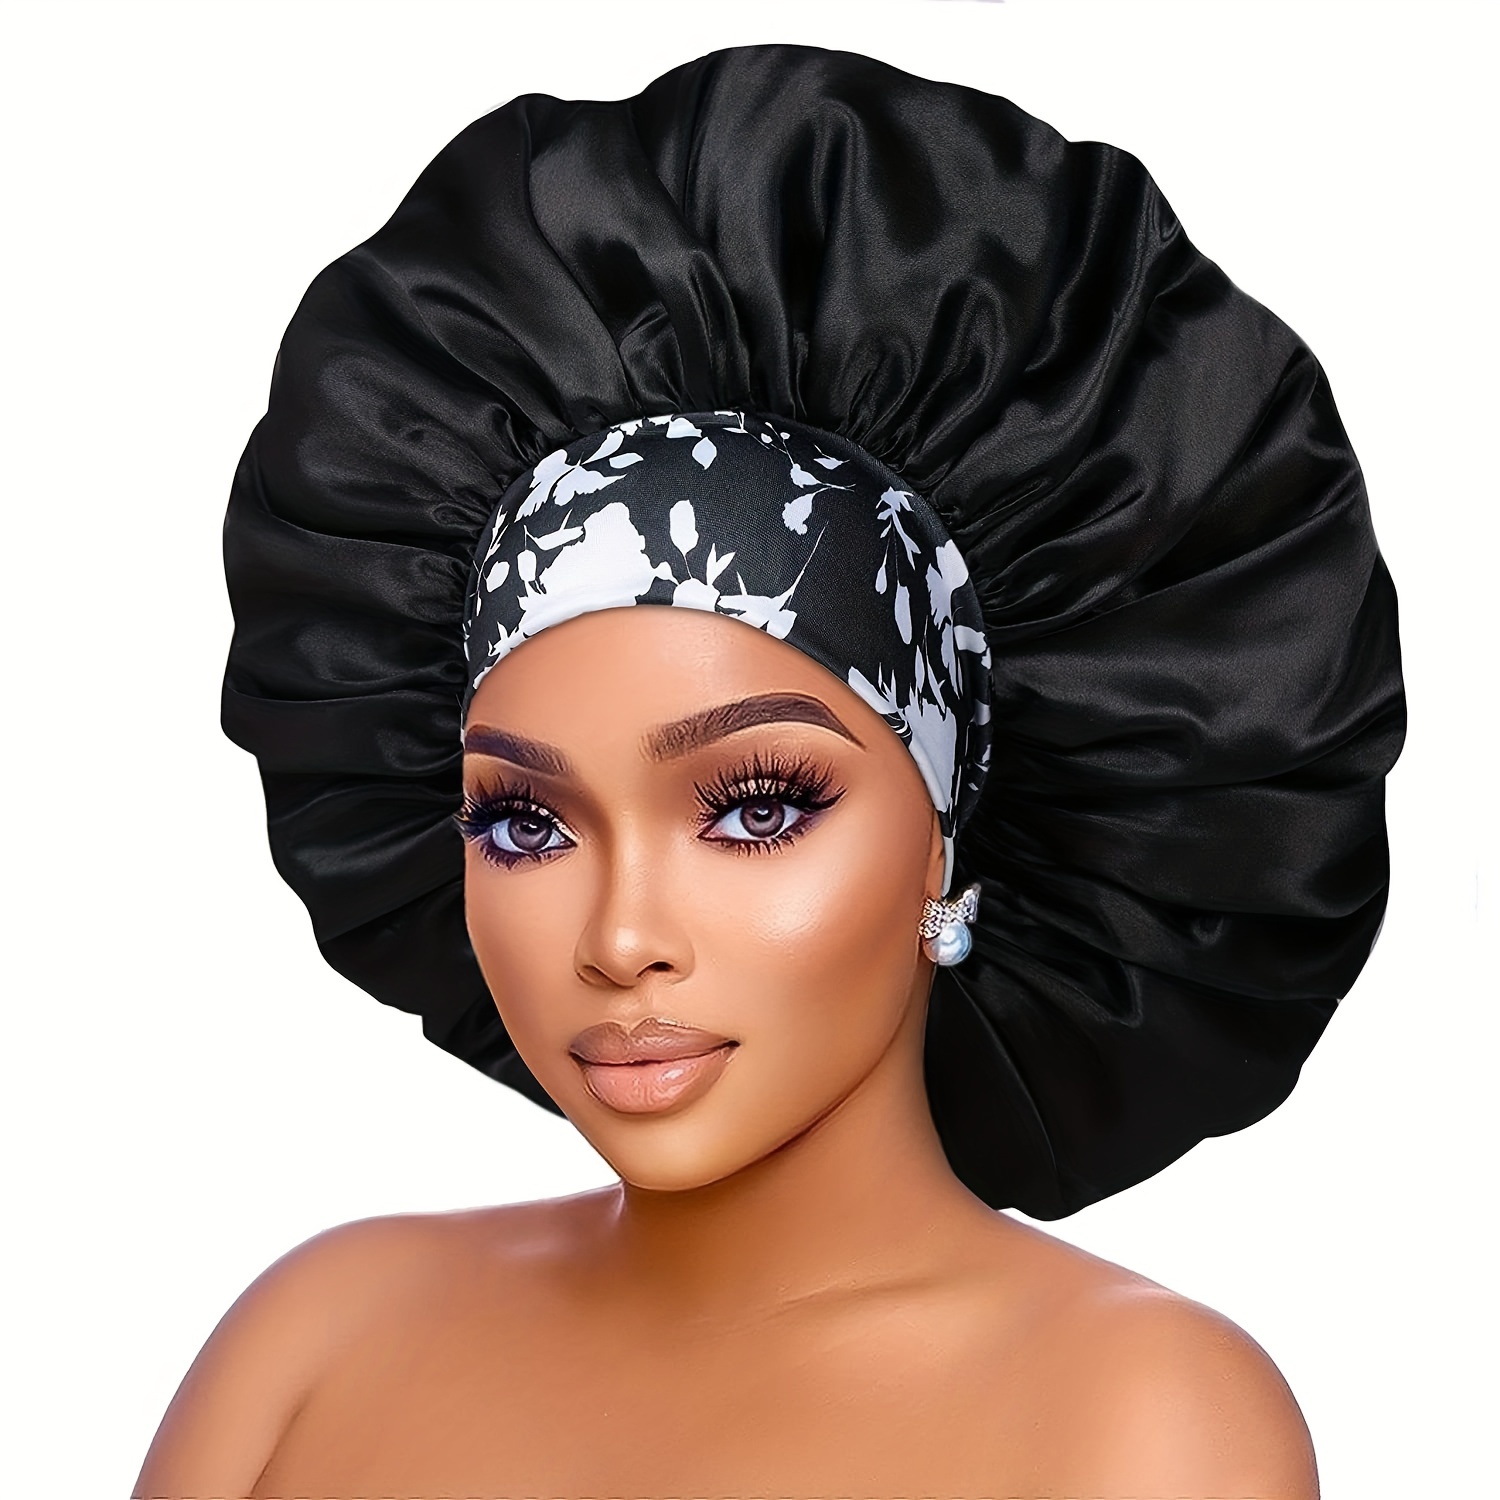 

1pc Extra Large Satin Bonnets For Sleeping, Hair Bonnets For Women Braids Curly Straight Hair, Hair Cap With Floral Pattern Wide Elastic Band (random Flower Print Position)